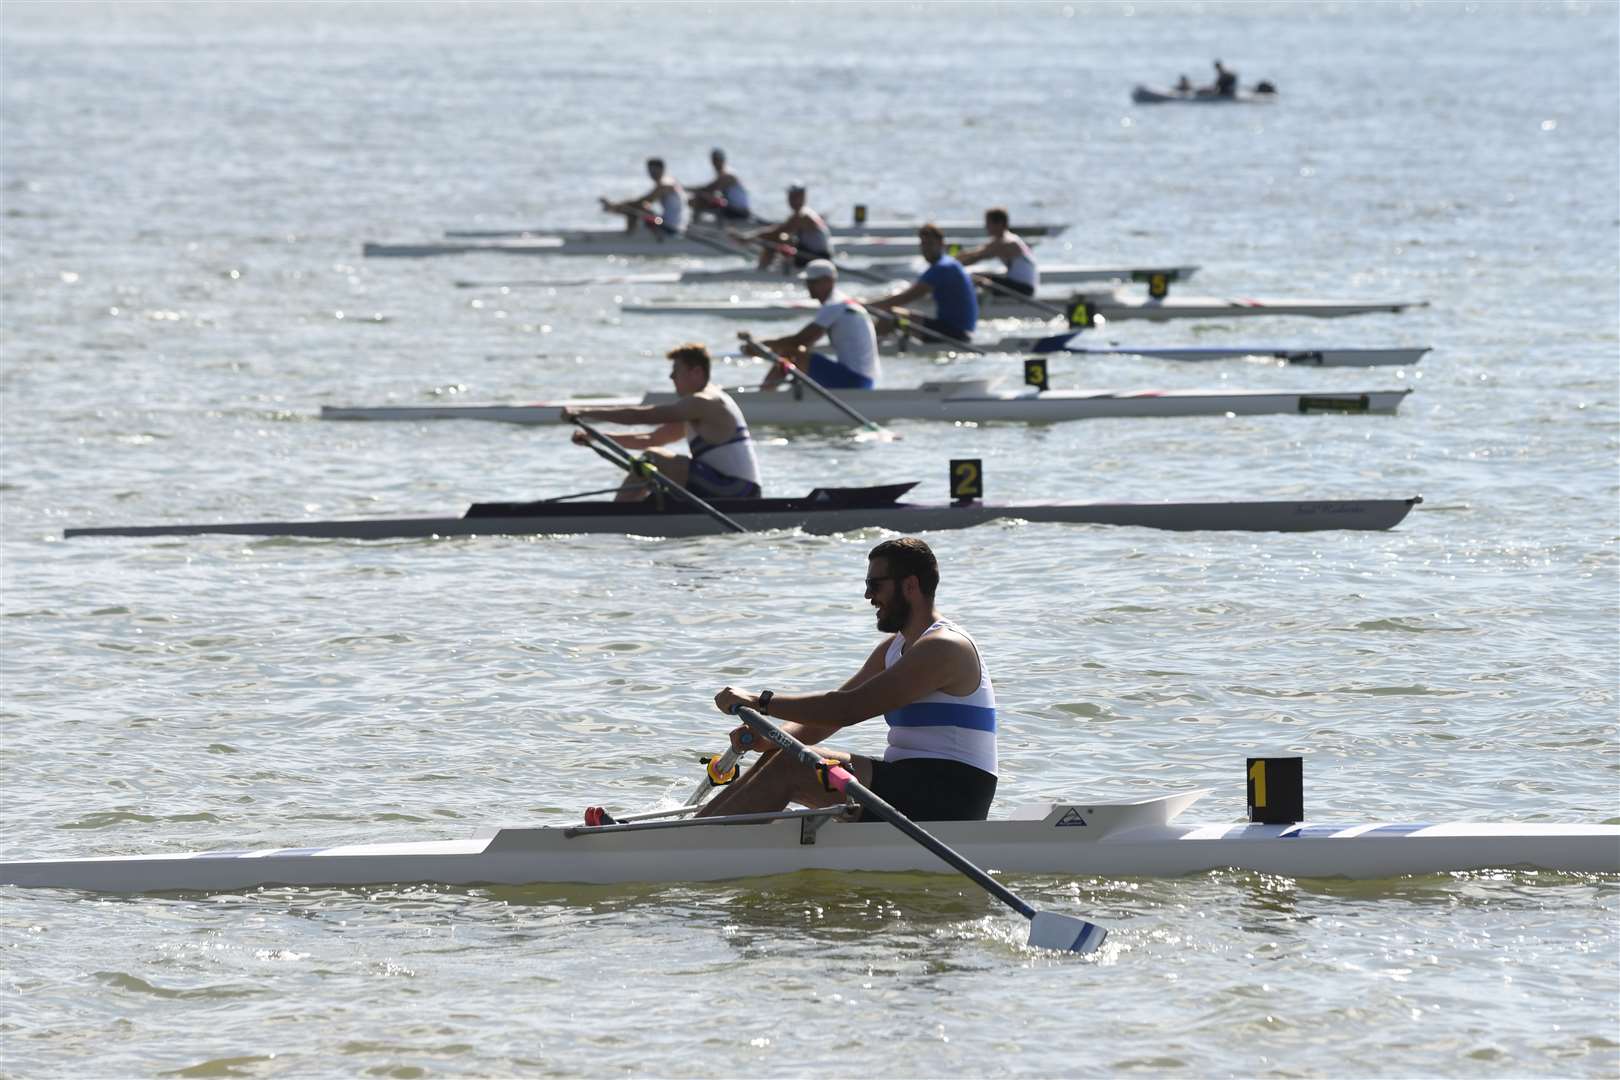 Deal Rowing Club competing in its own Regatta